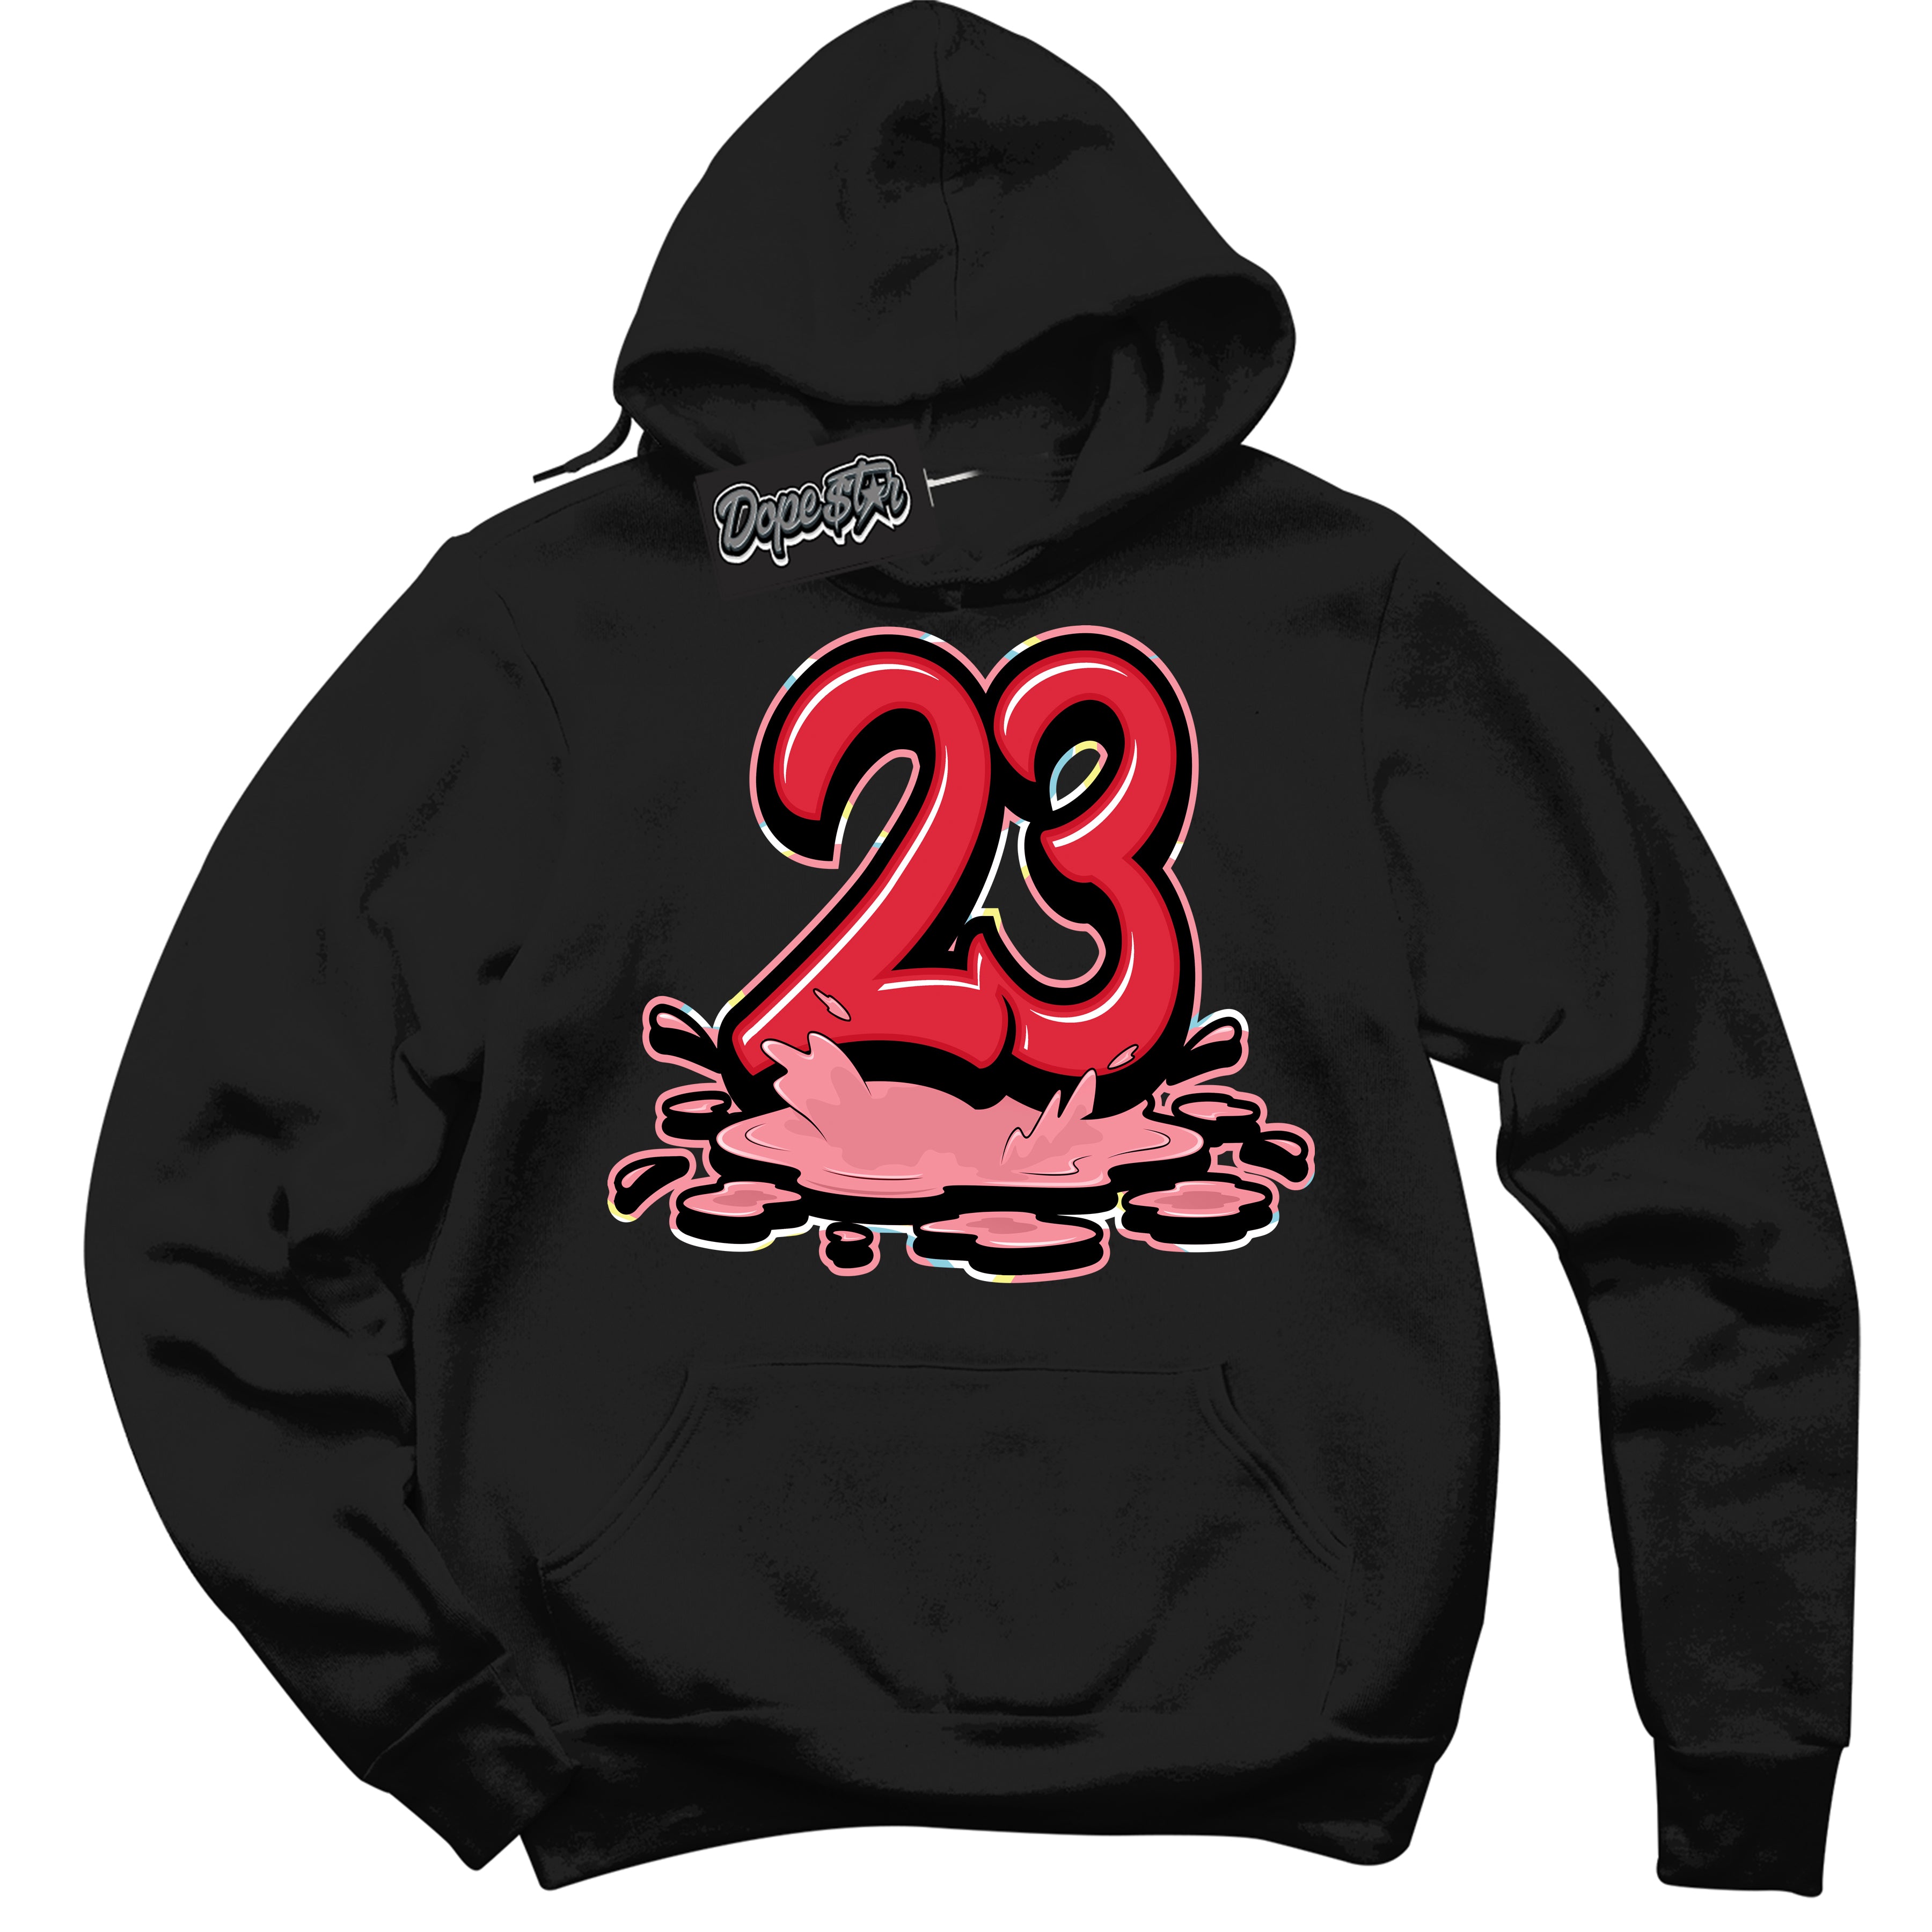 Cool Black Graphic DopeStar Hoodie with “ 23 Melting “ print, that perfectly matches Spider-Verse 1s sneakers